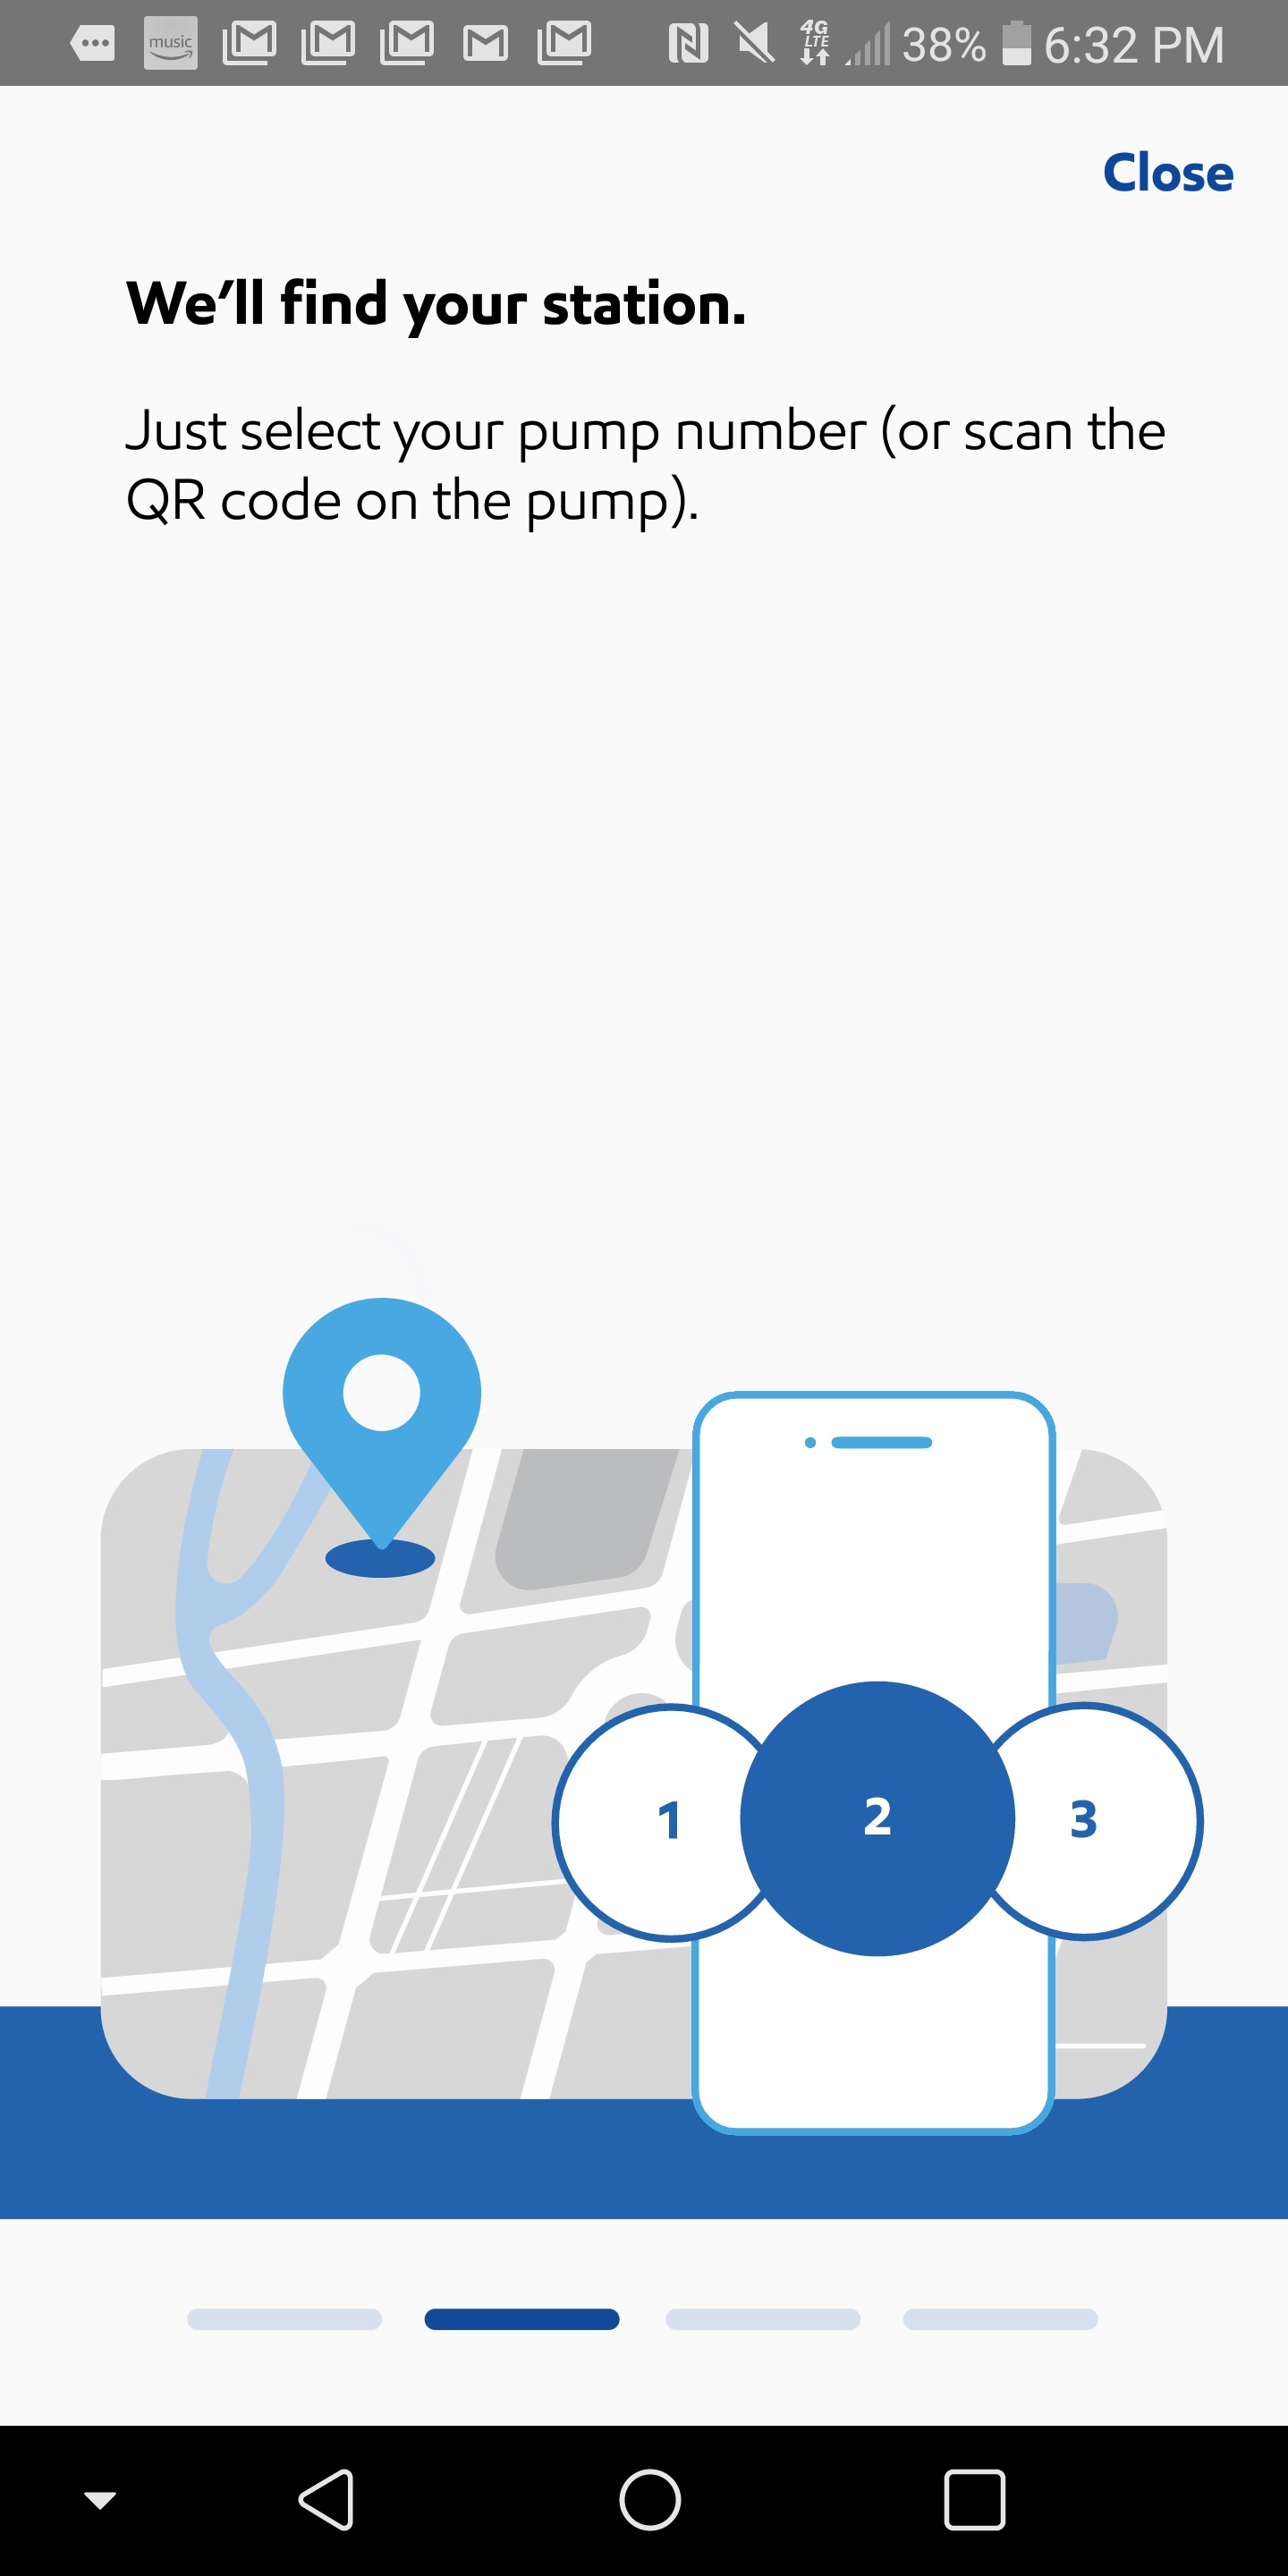 a screenshot of a phone and map